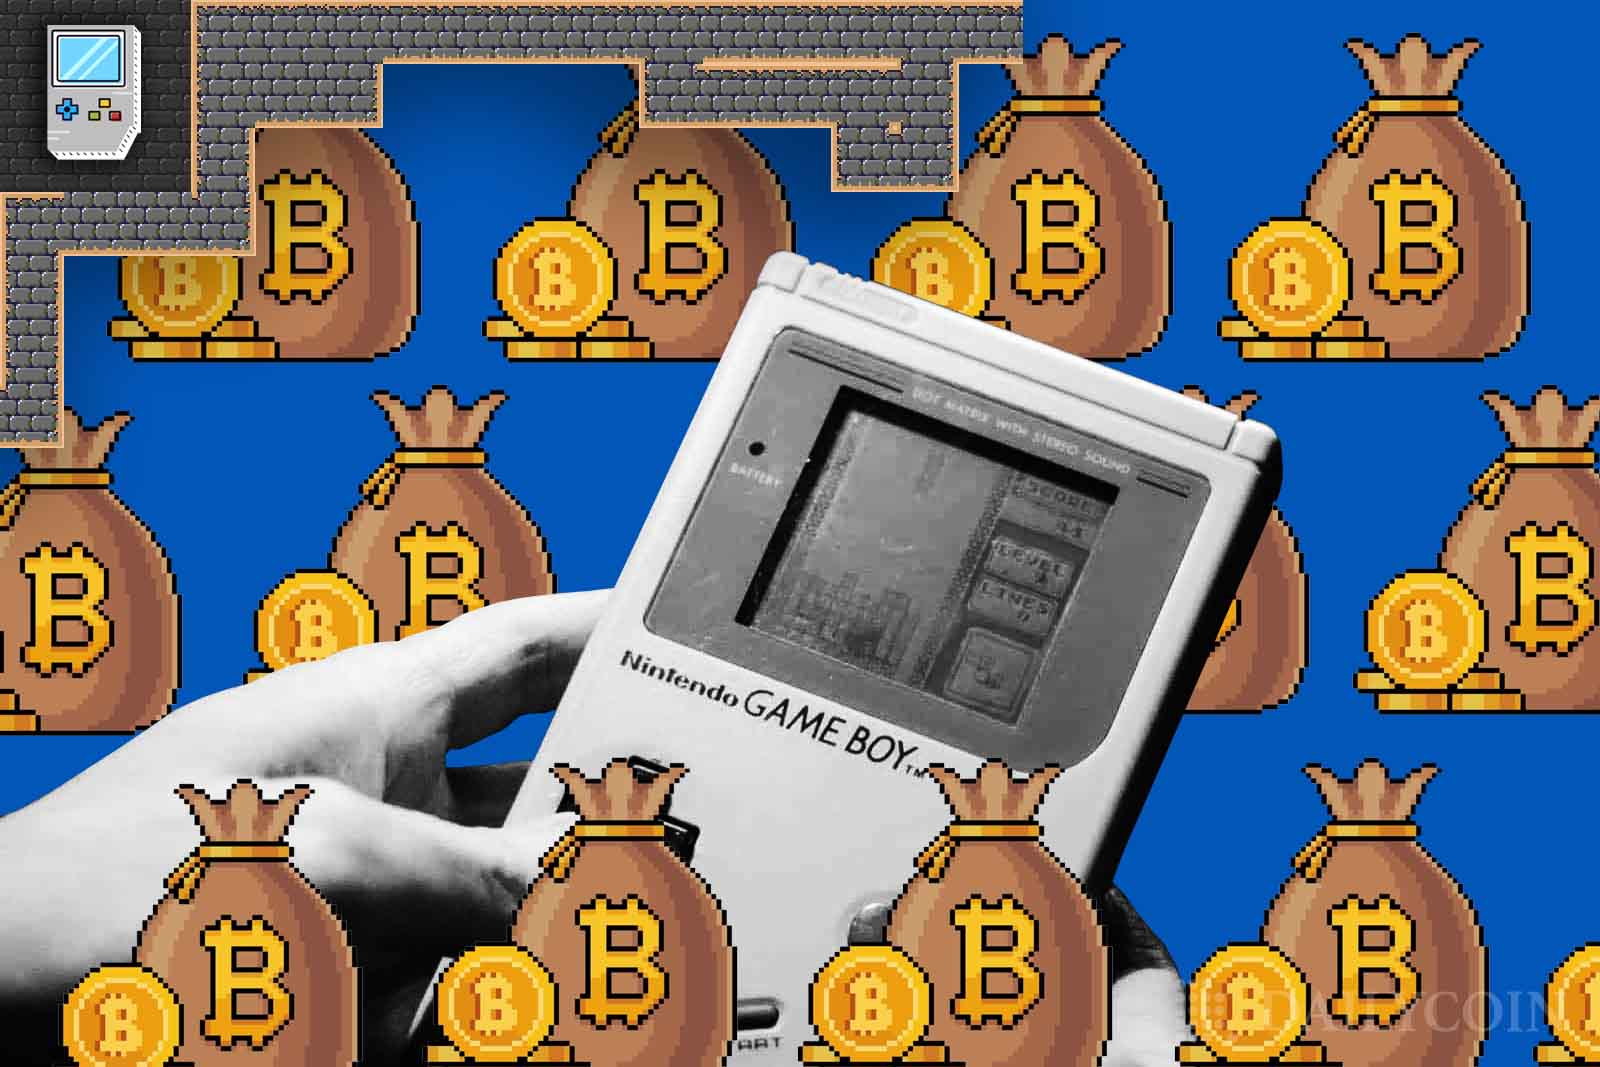 How Long Does It Take to Mine a Bitcoin on Game Boy – A Million Times Faster Than with Pencil and Paper